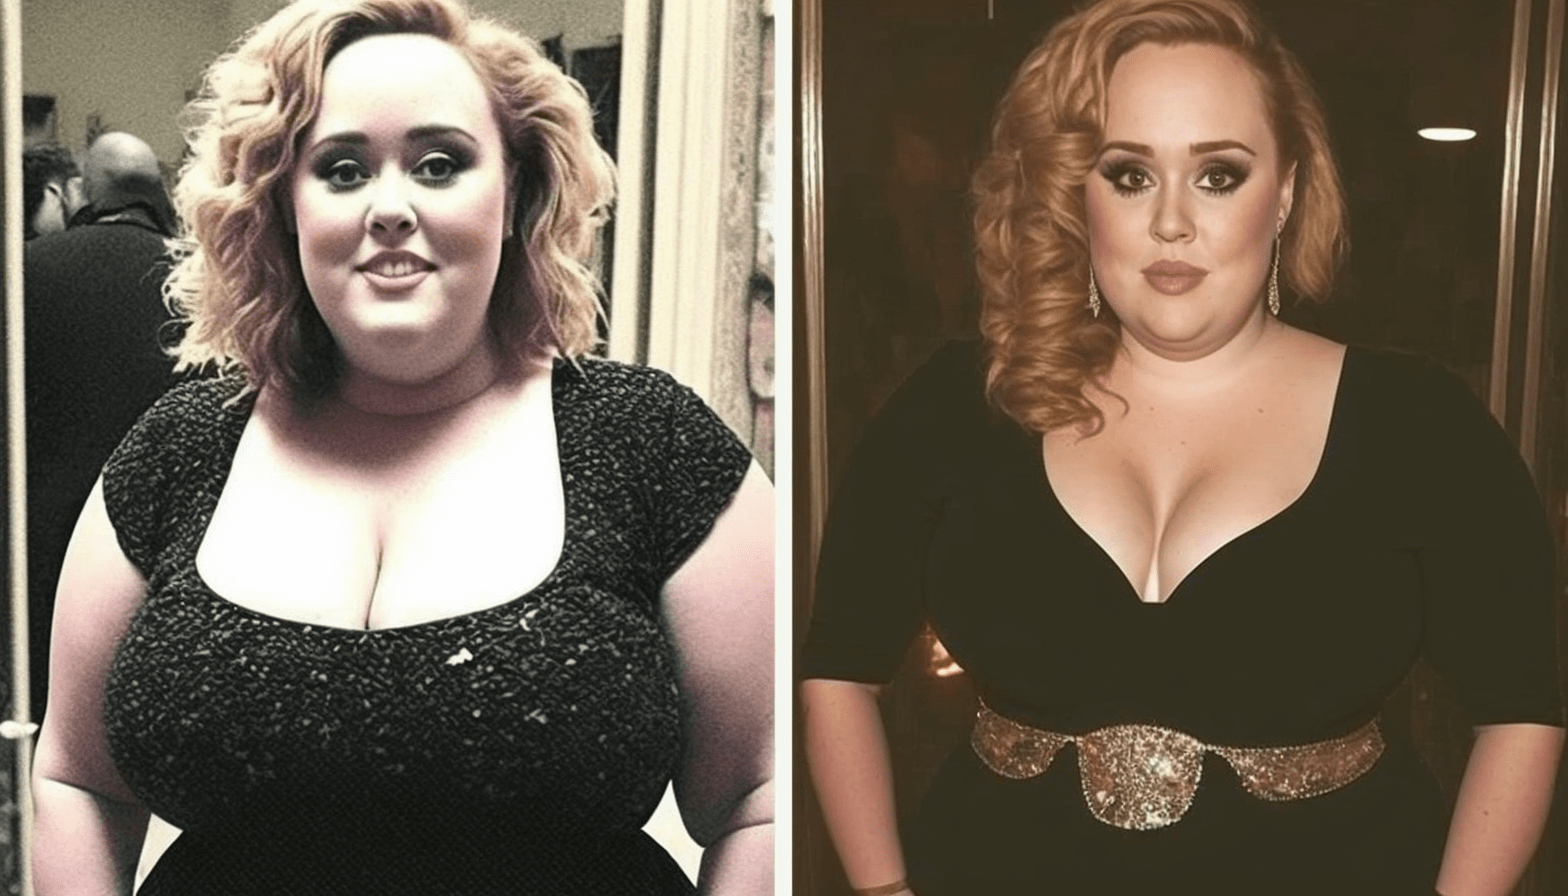 The Top 10 Most Shocking Celebrity Transformations You Won't Believe